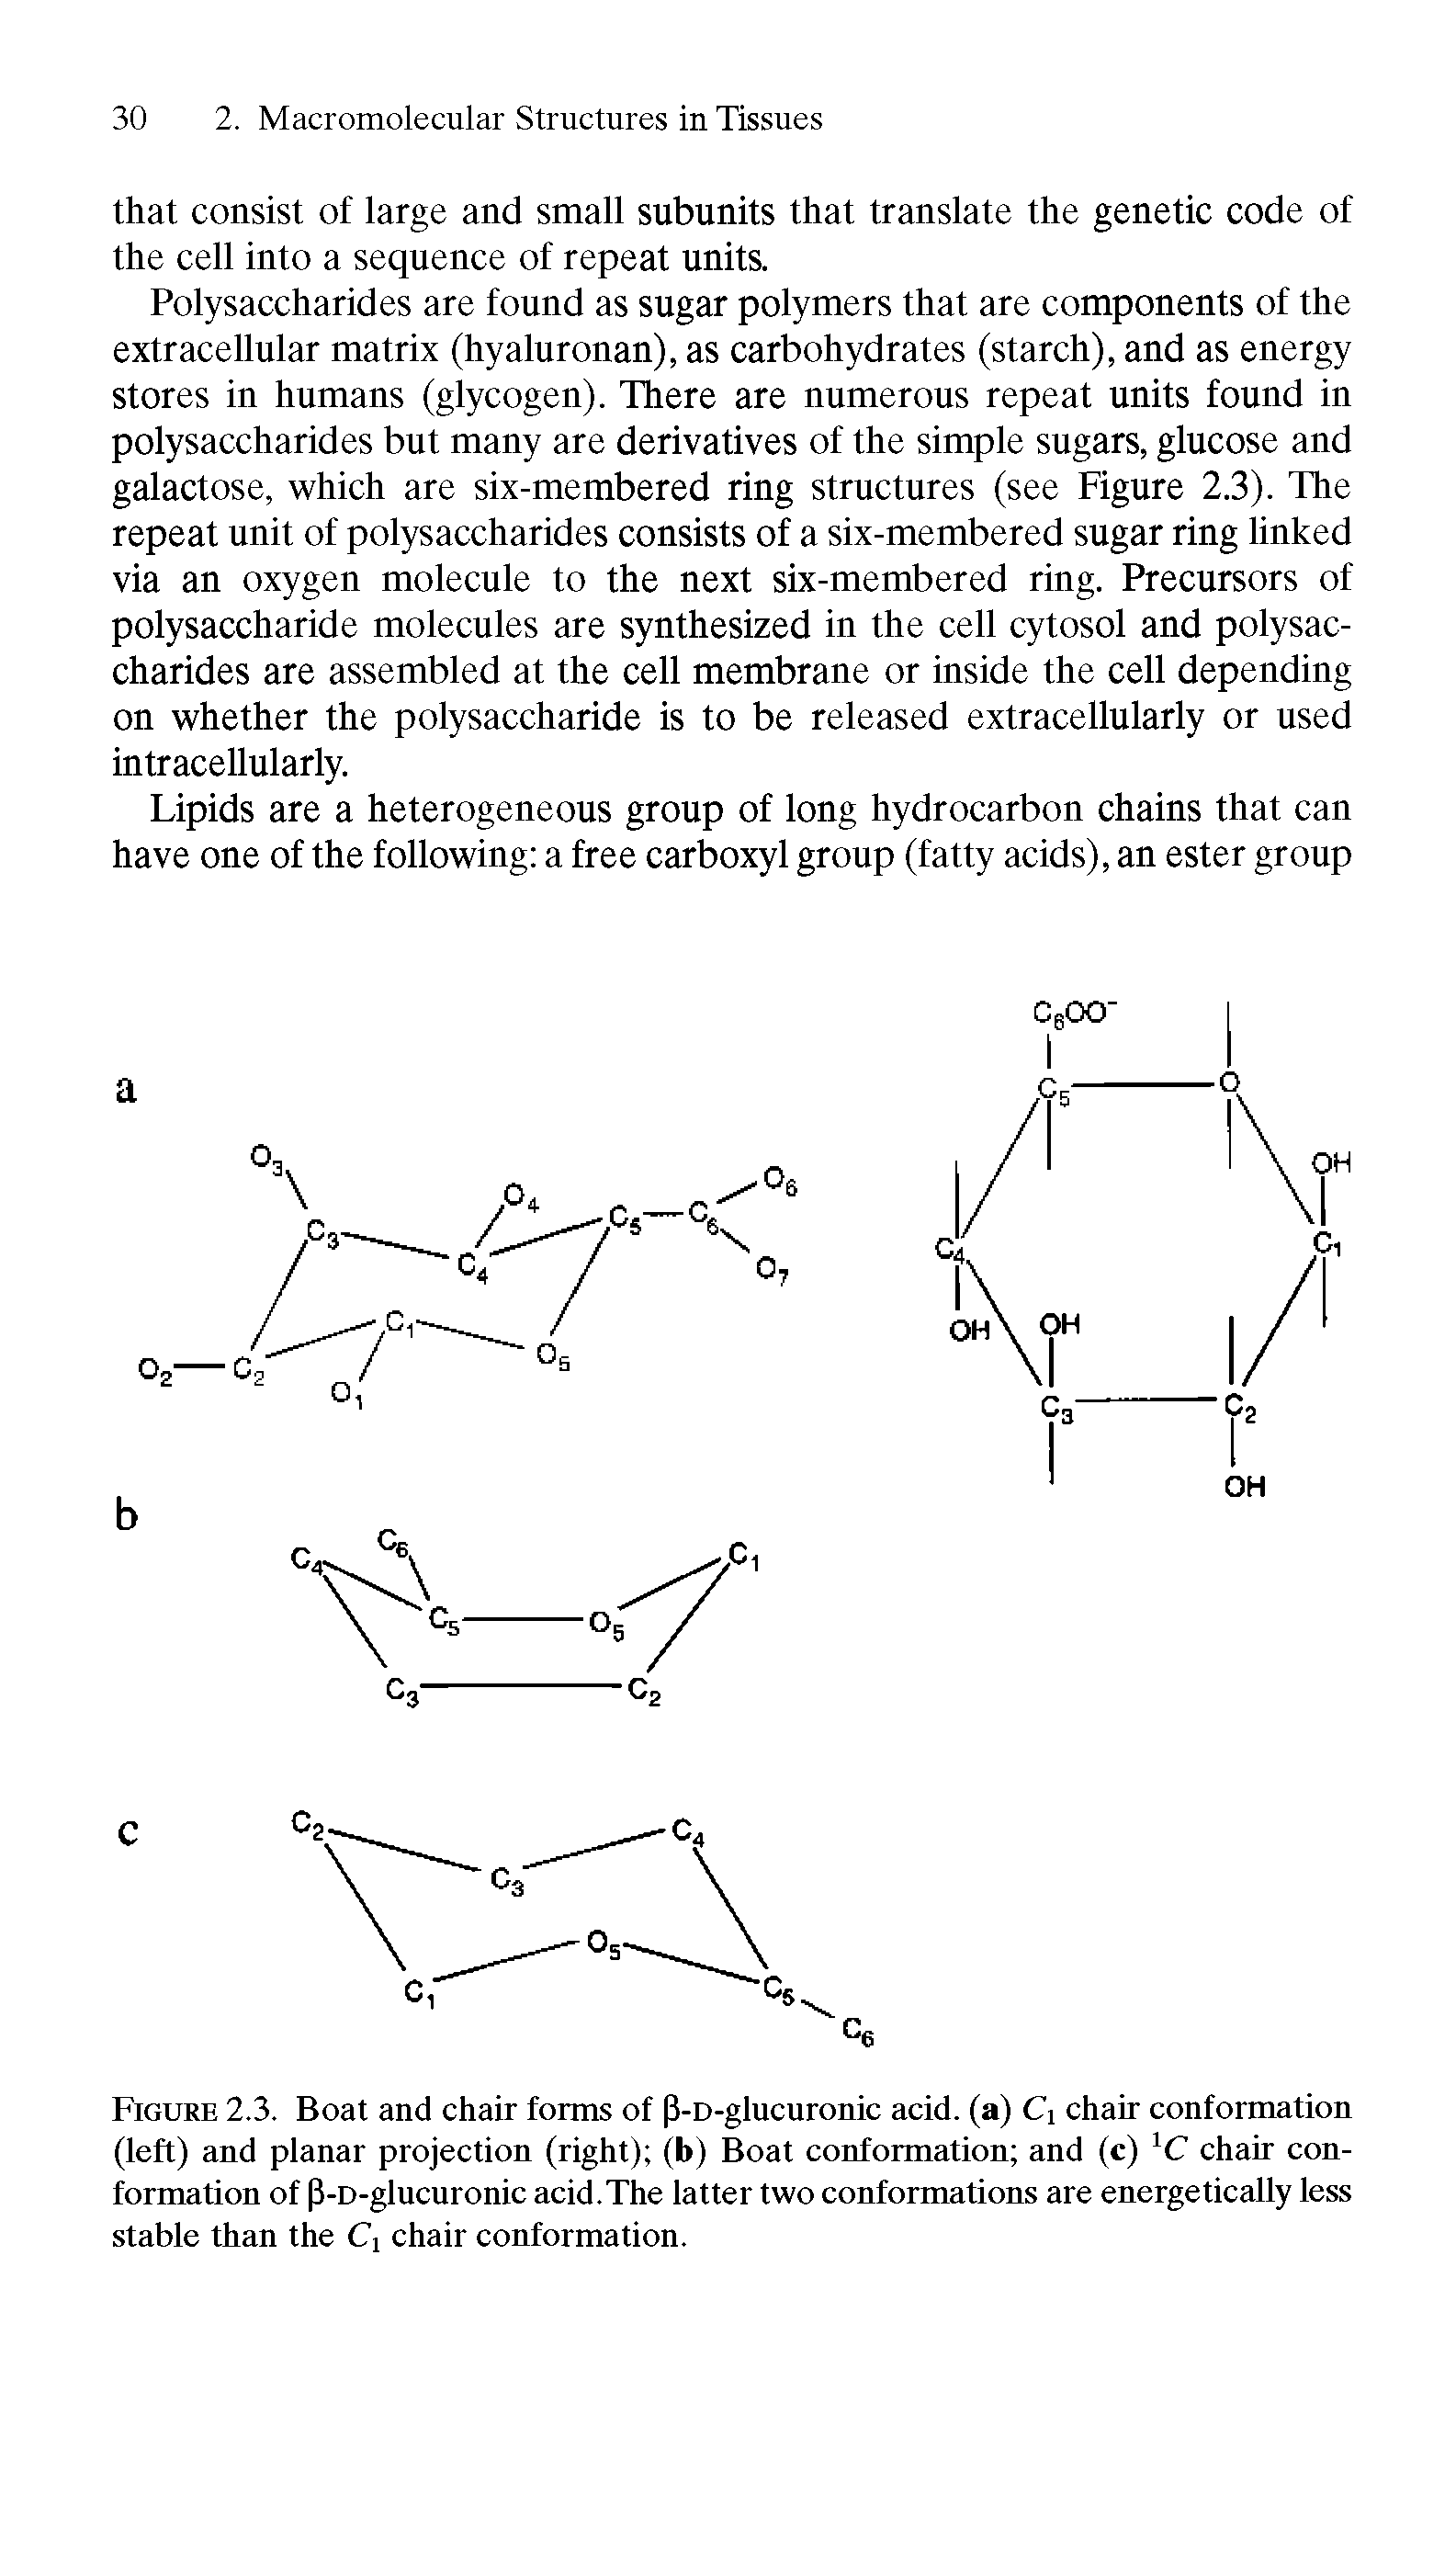 Figure 2.3. Boat and chair forms of P-D-glucuronic acid, (a) Cj chair conformation (left) and planar projection (right) (b) Boat conformation and (c) 1C chair conformation of P-D-glucuronic acid.The latter two conformations are energetically less stable than the Ci chair conformation.